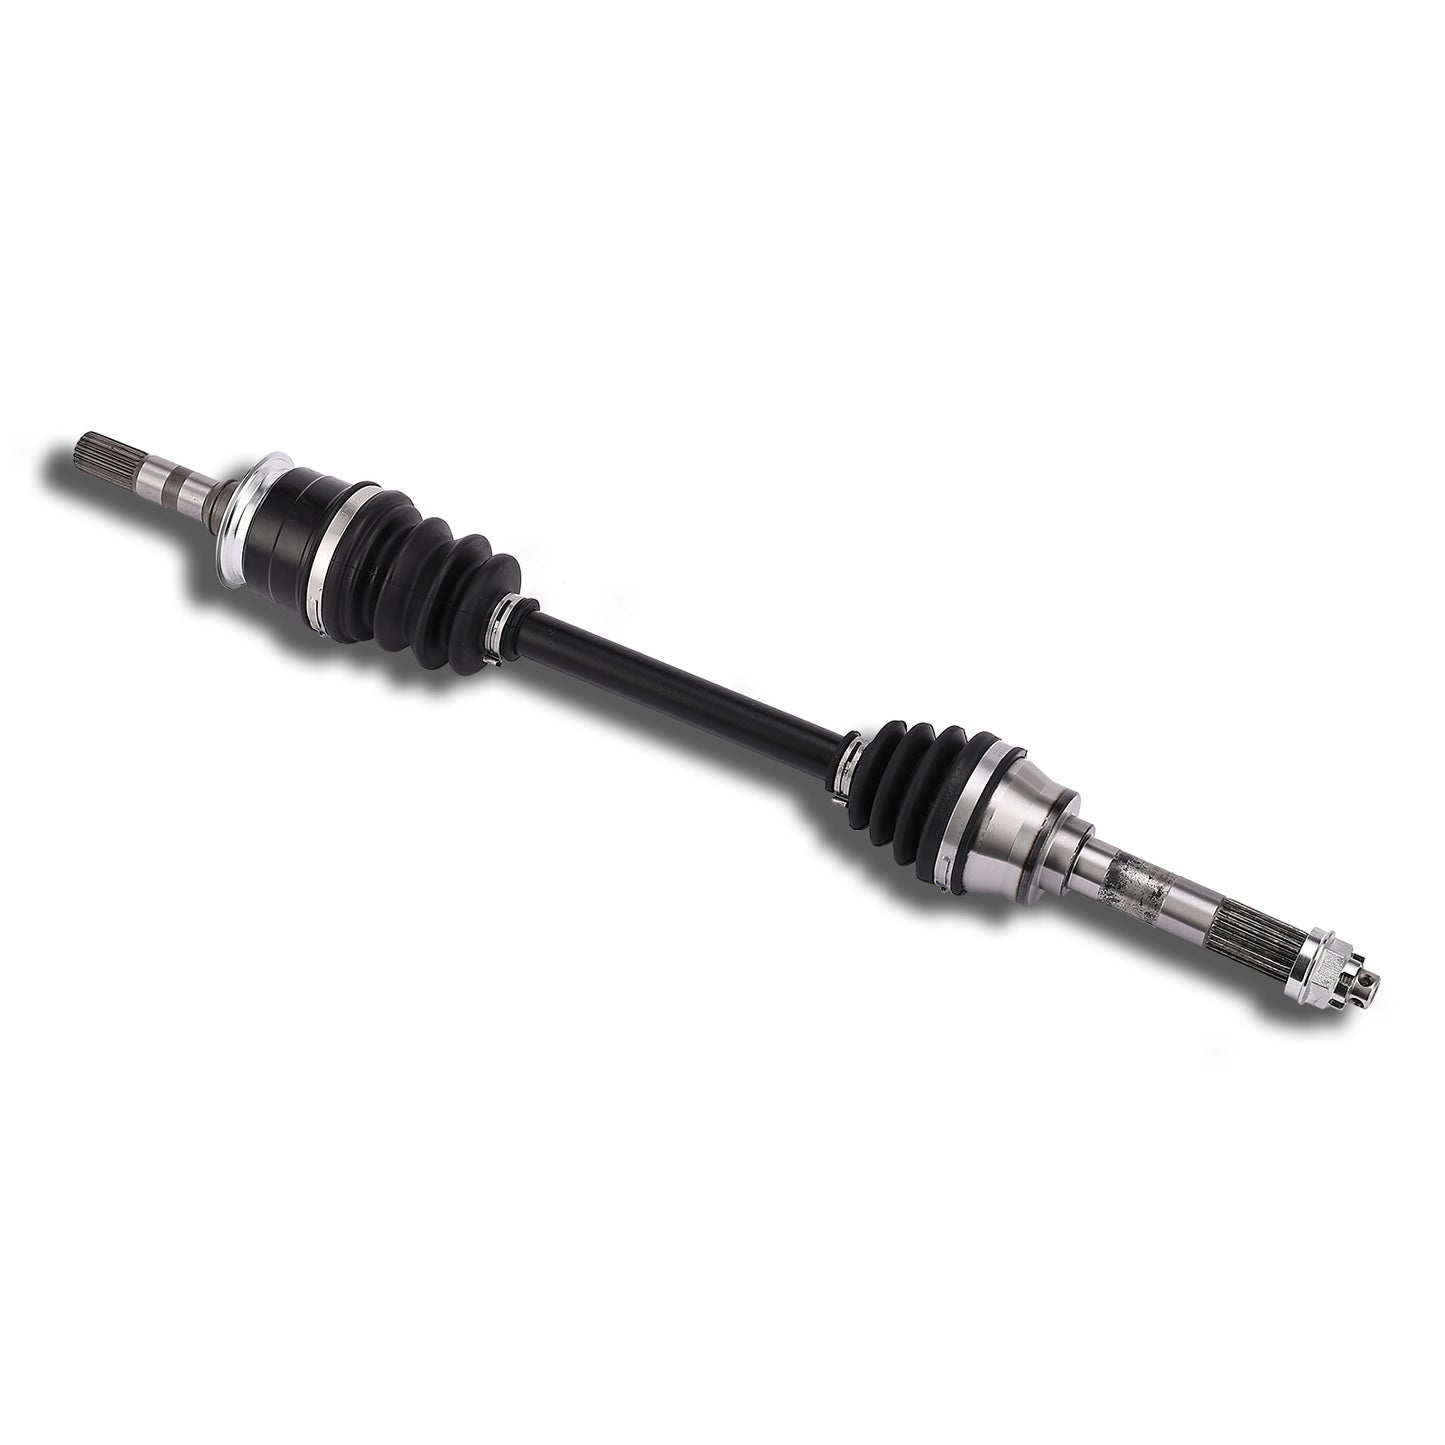 2 CAM-KW305 Front Left Drive Shaft CV Axle Compatible with KAWASAKI (2000-2002) Mule 2510 BF / (2001-2008) Mule 3010 BF / (2009-2019) Mule 4010 BF